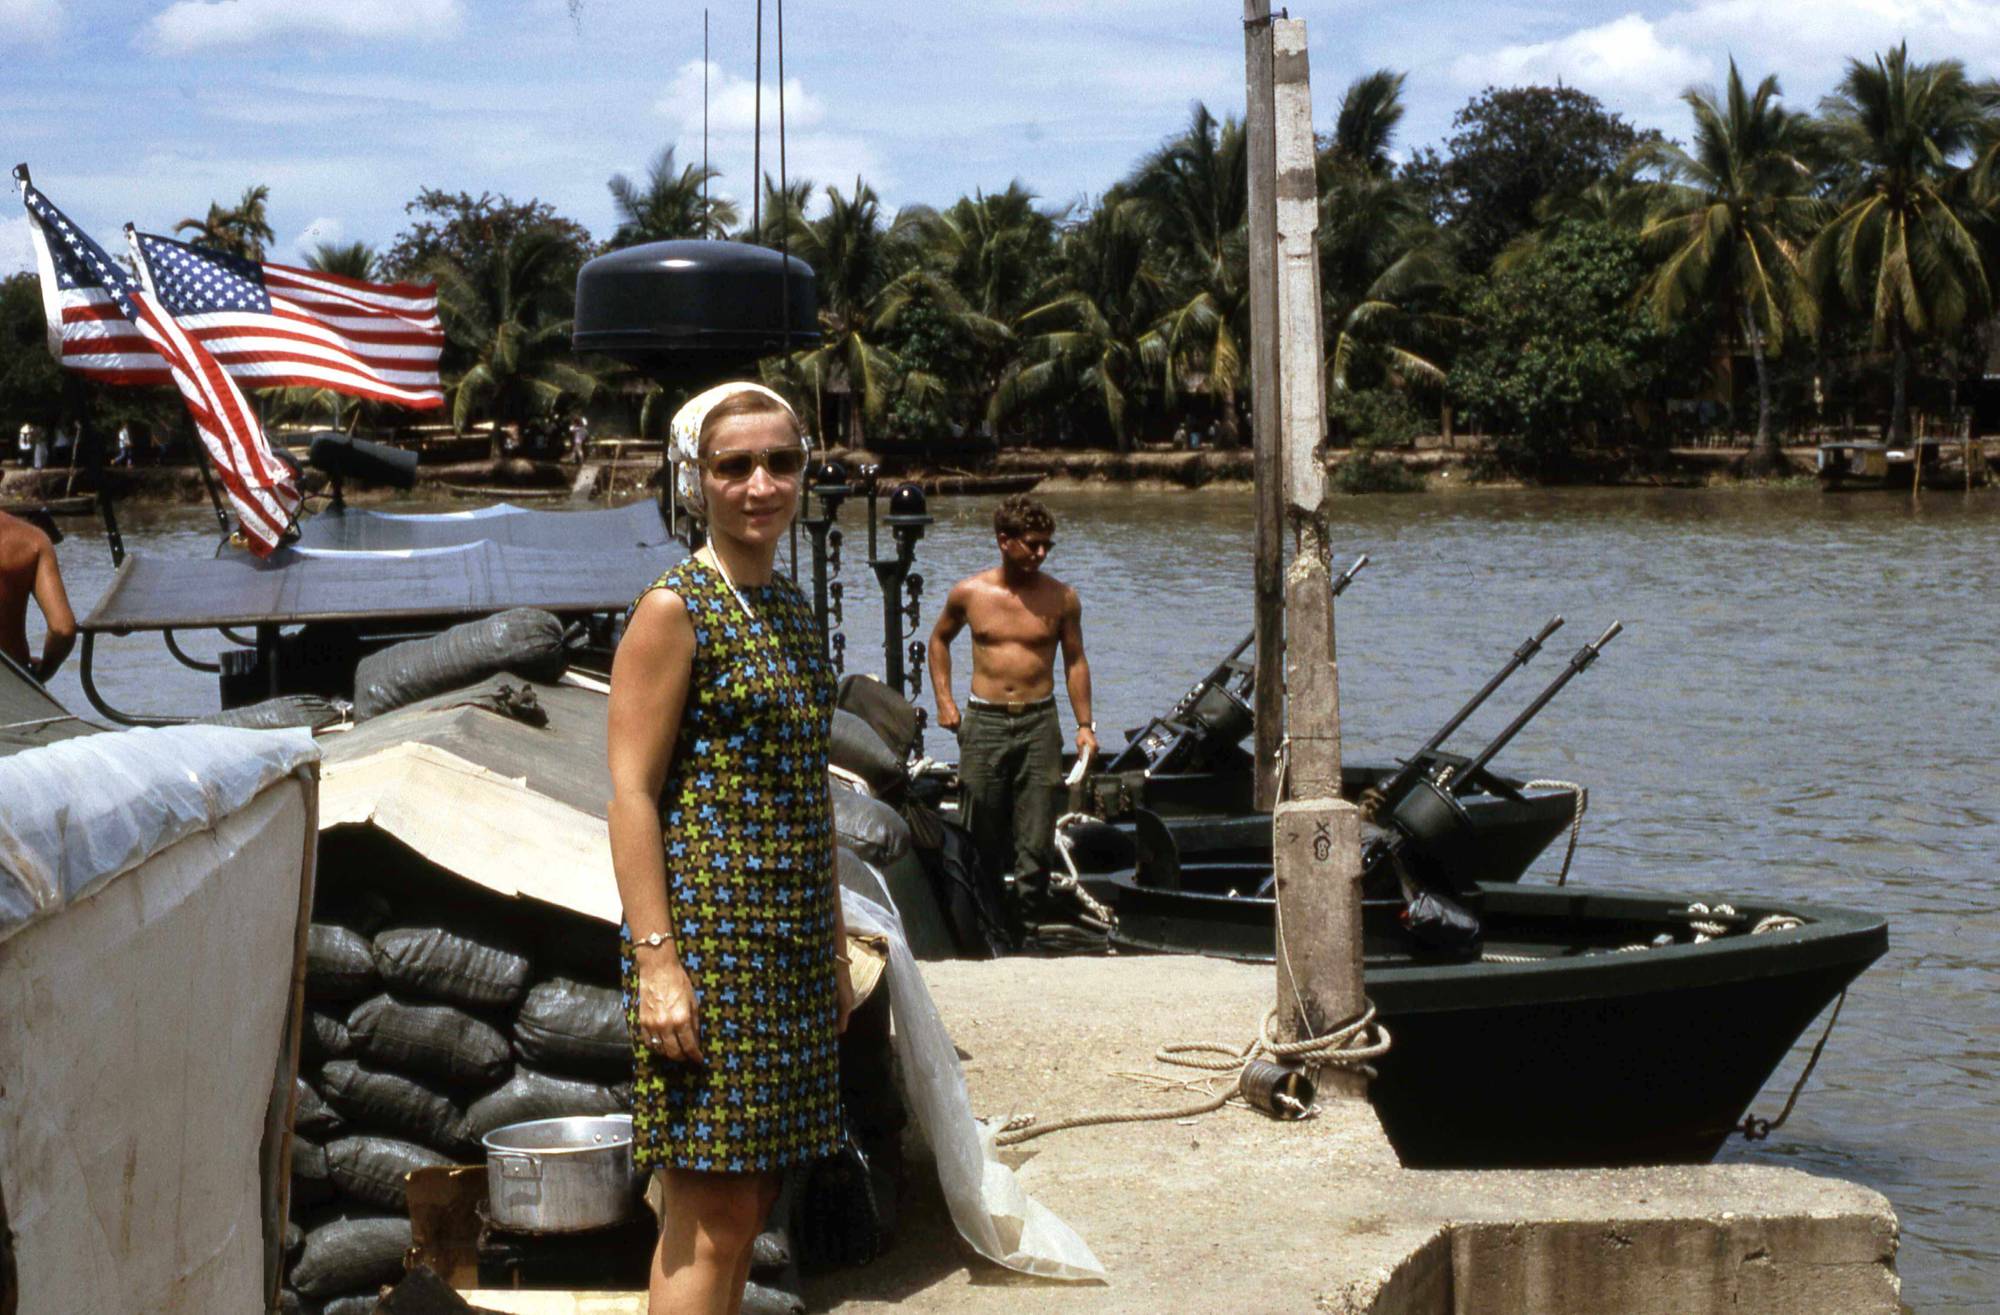 Young woman posing for a photo on a River Patrol Boat with American flags flying